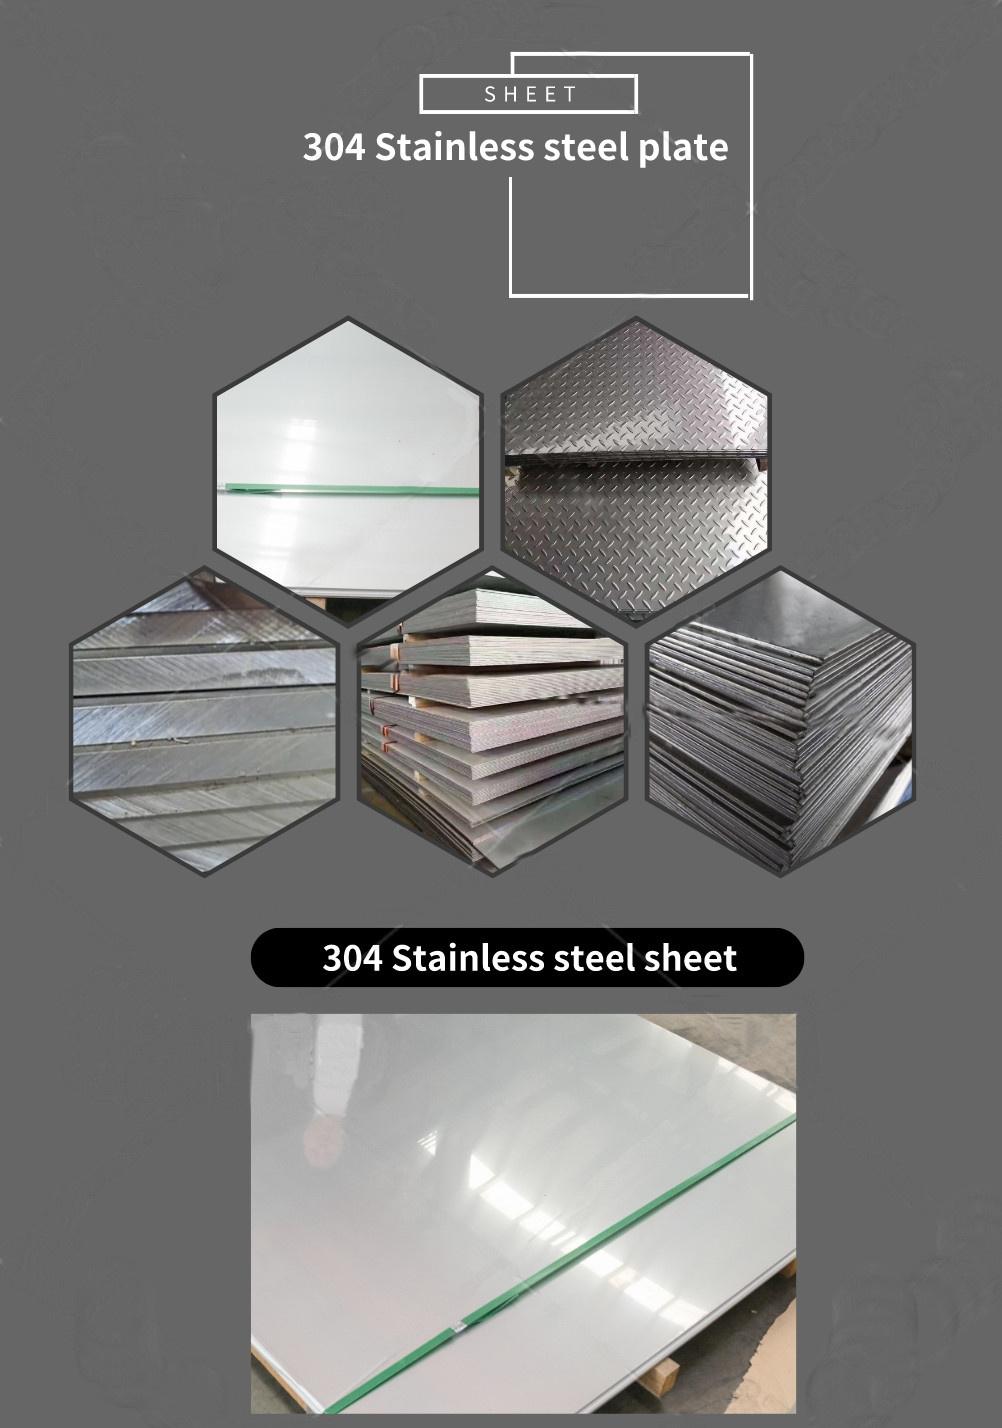 ASTM/GB/JIS 304ln 305 Hot Rolled Stainless Steel Plate for Boat Board